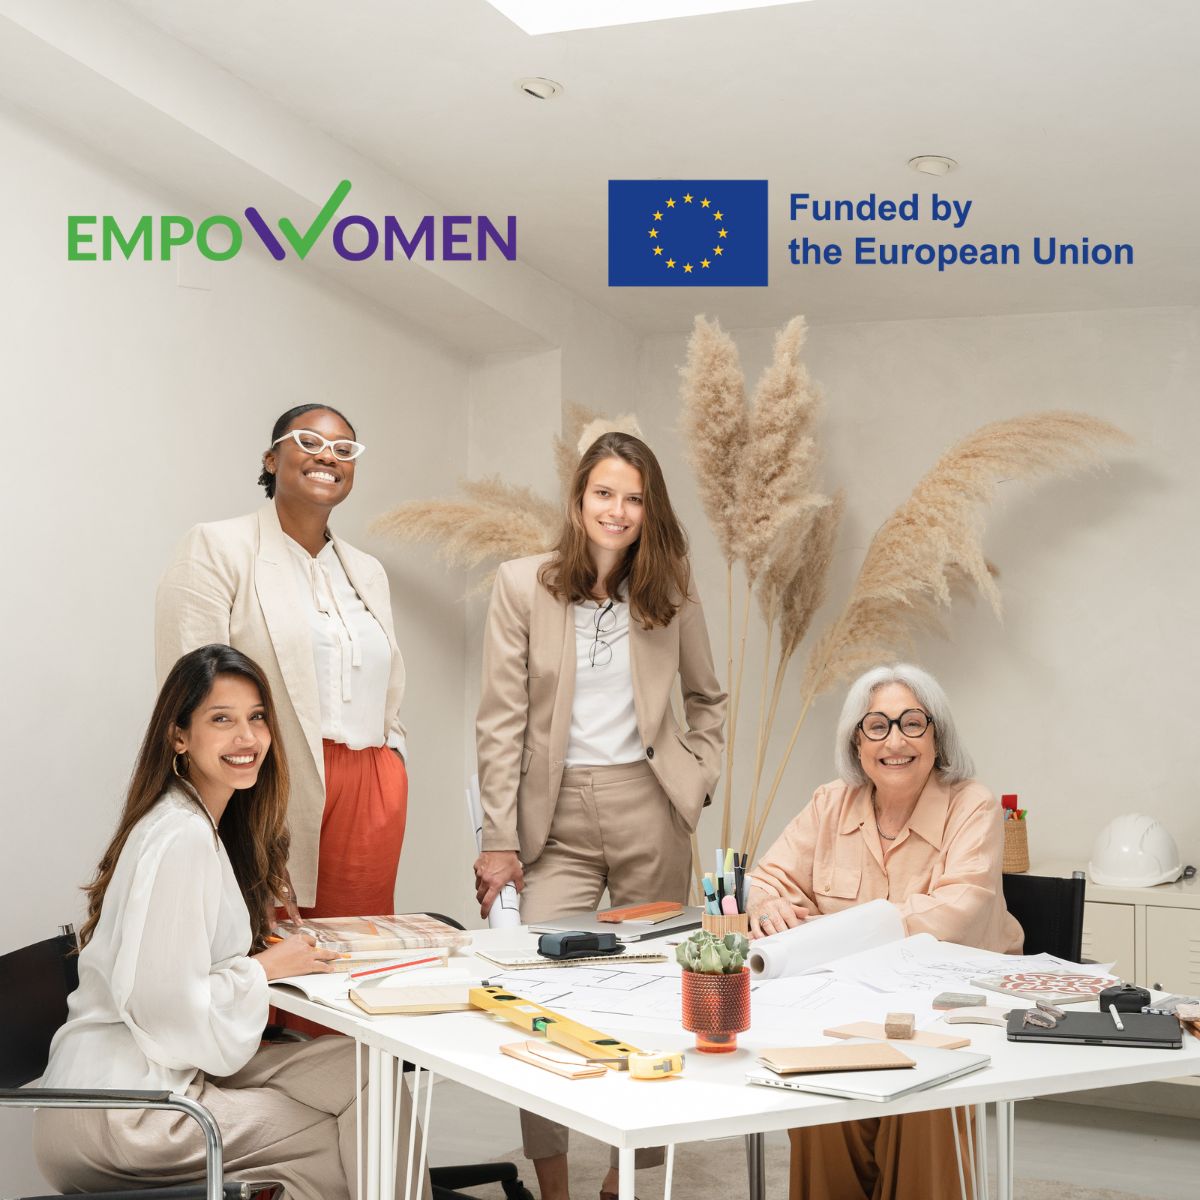 According report of the European Investment Bank, women-led companies are more likely to undertake innovation, introducing new products and processes. Innovate and grow with #EmpoWomen Program, Ladies! 1st Open Call lasts until March 8.
More details: empowomen.eu